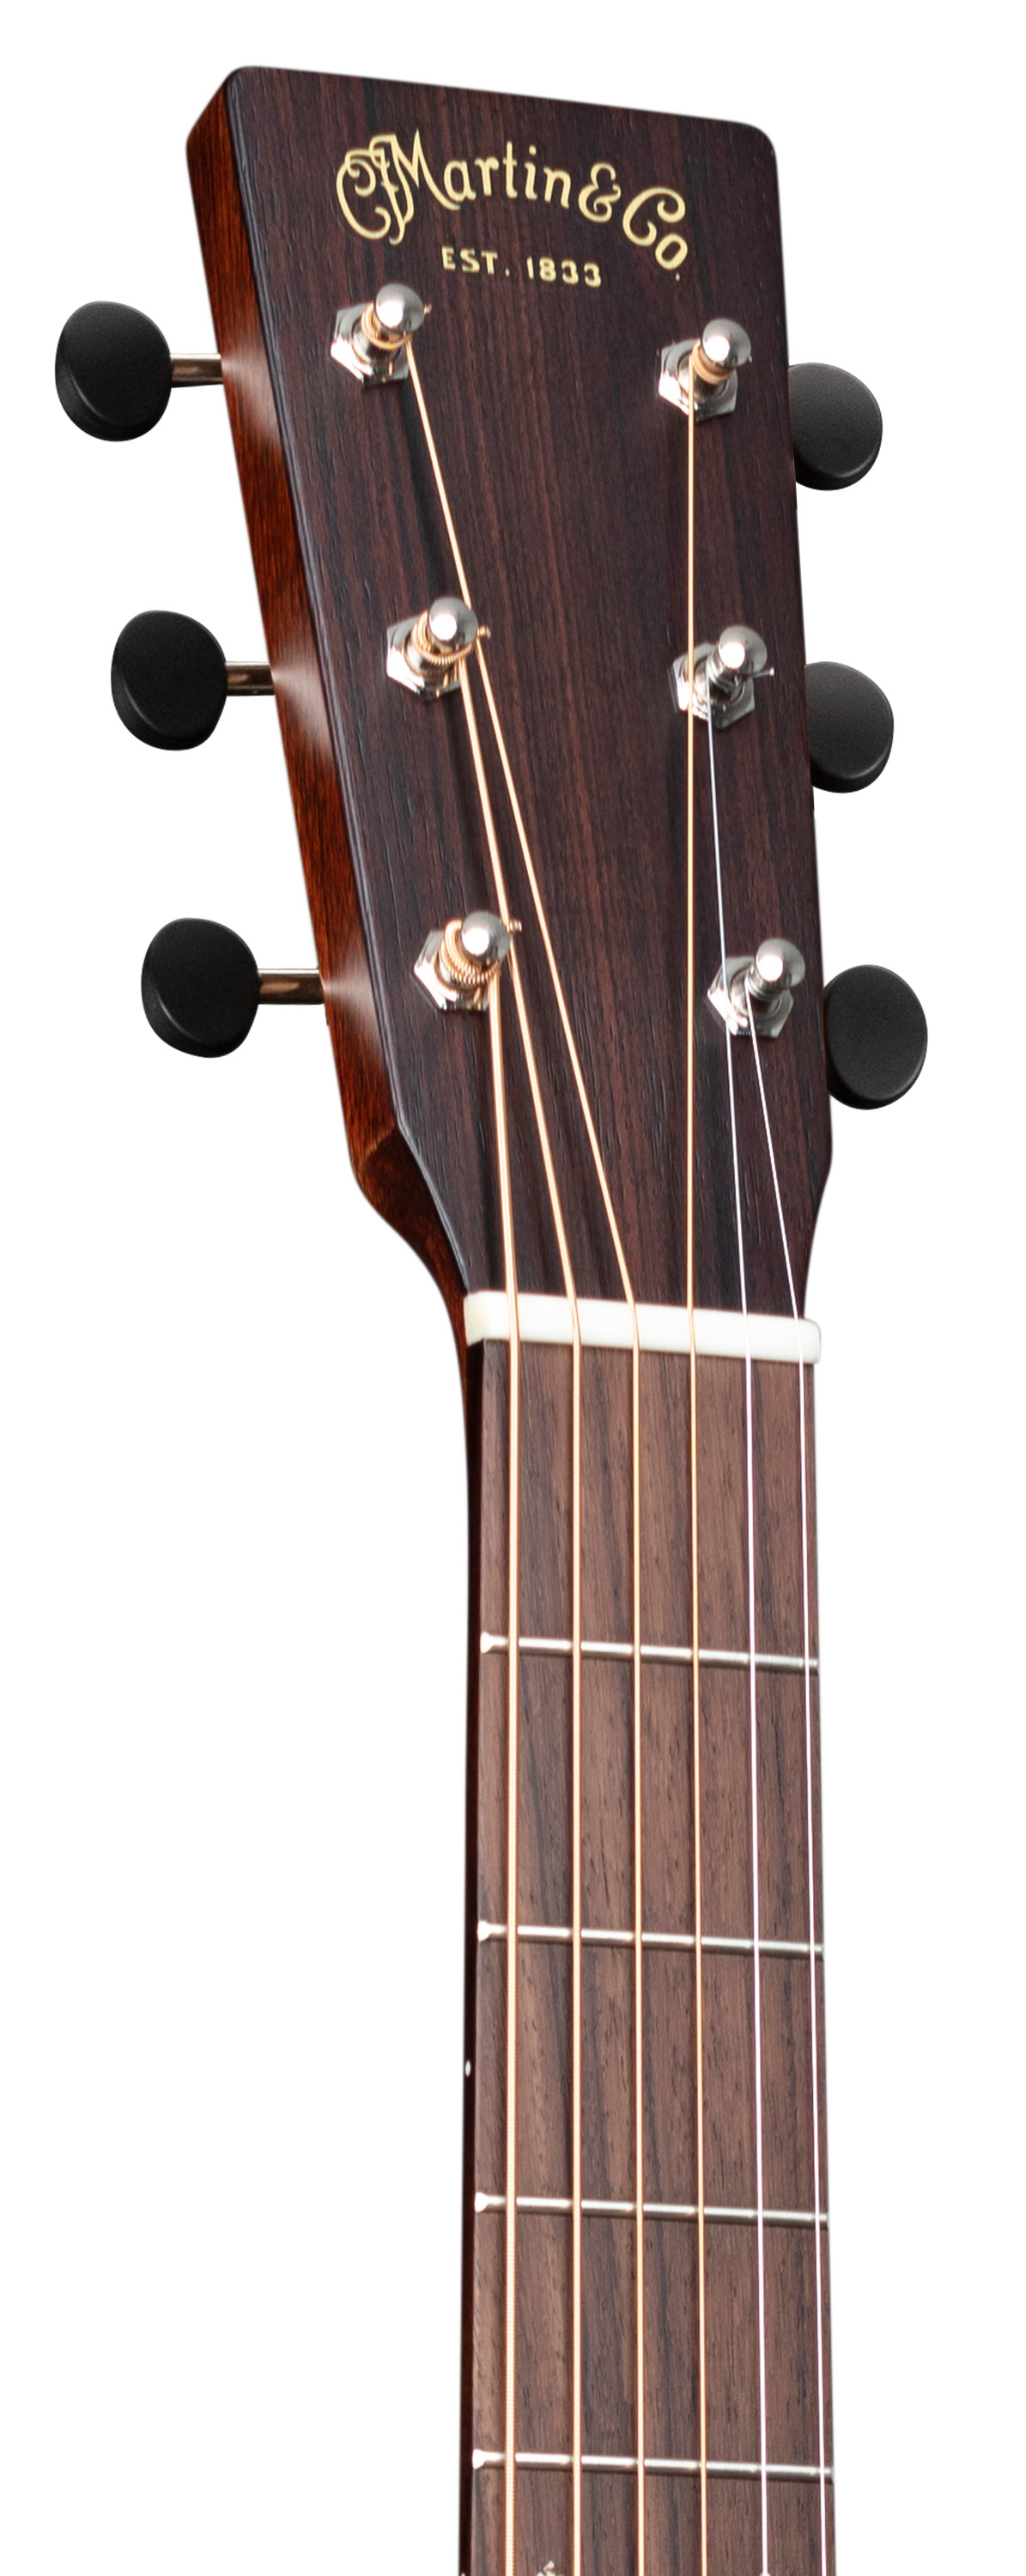 000-14 Fret Mahogany Construction and Low Oval Neck Shape Satin Finish Acoustic Guitar for the Working Musician Martin Guitar 000-15M with Gig Bag 